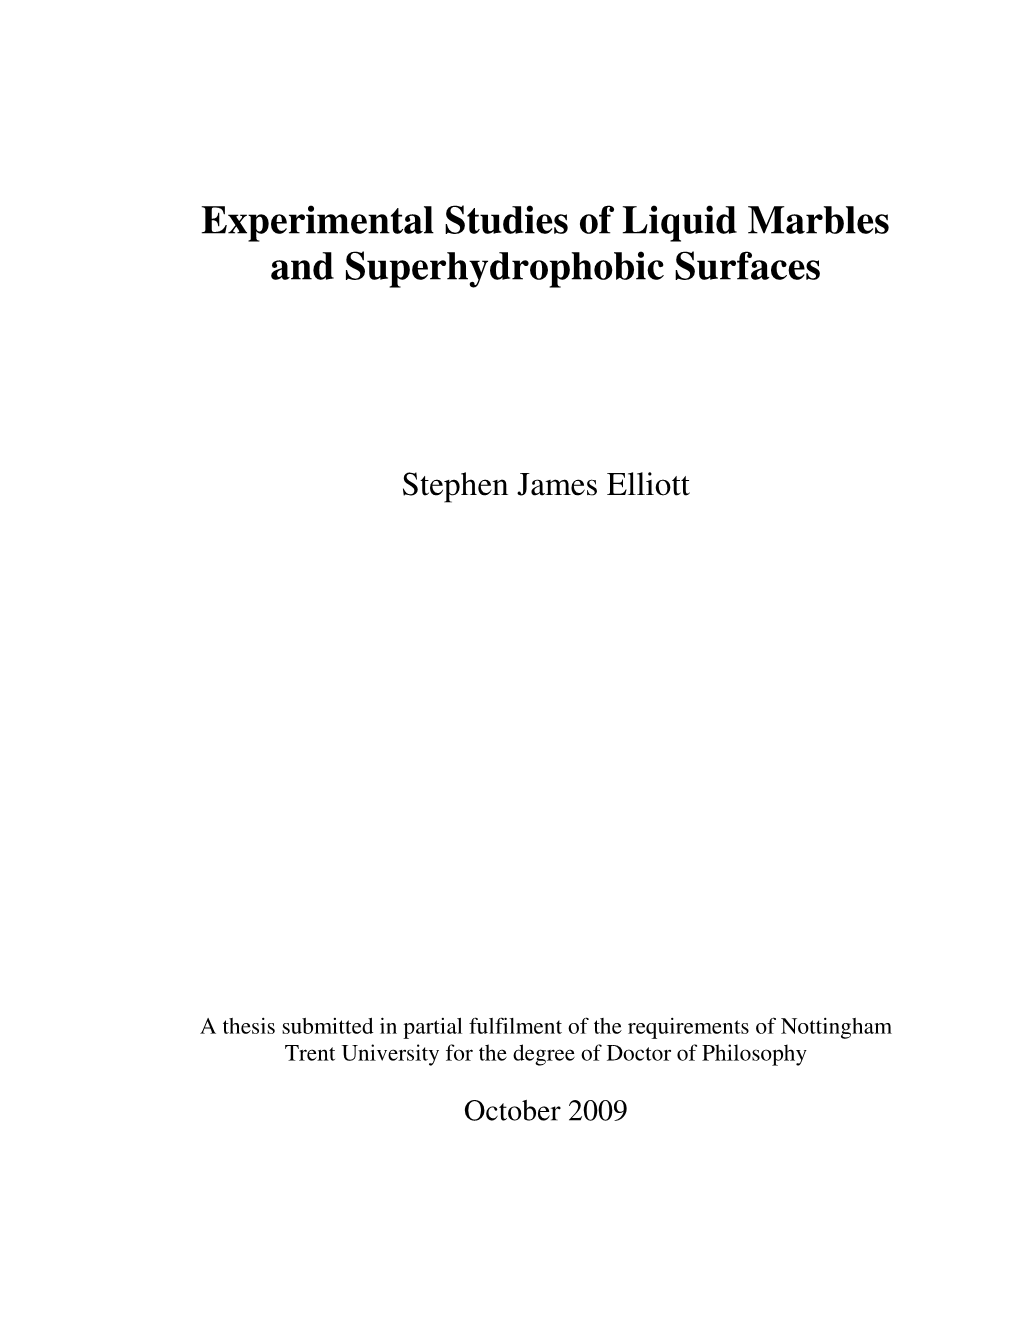 Experimental Studies of Liquid Marbles and Superhydrophobic Surfaces